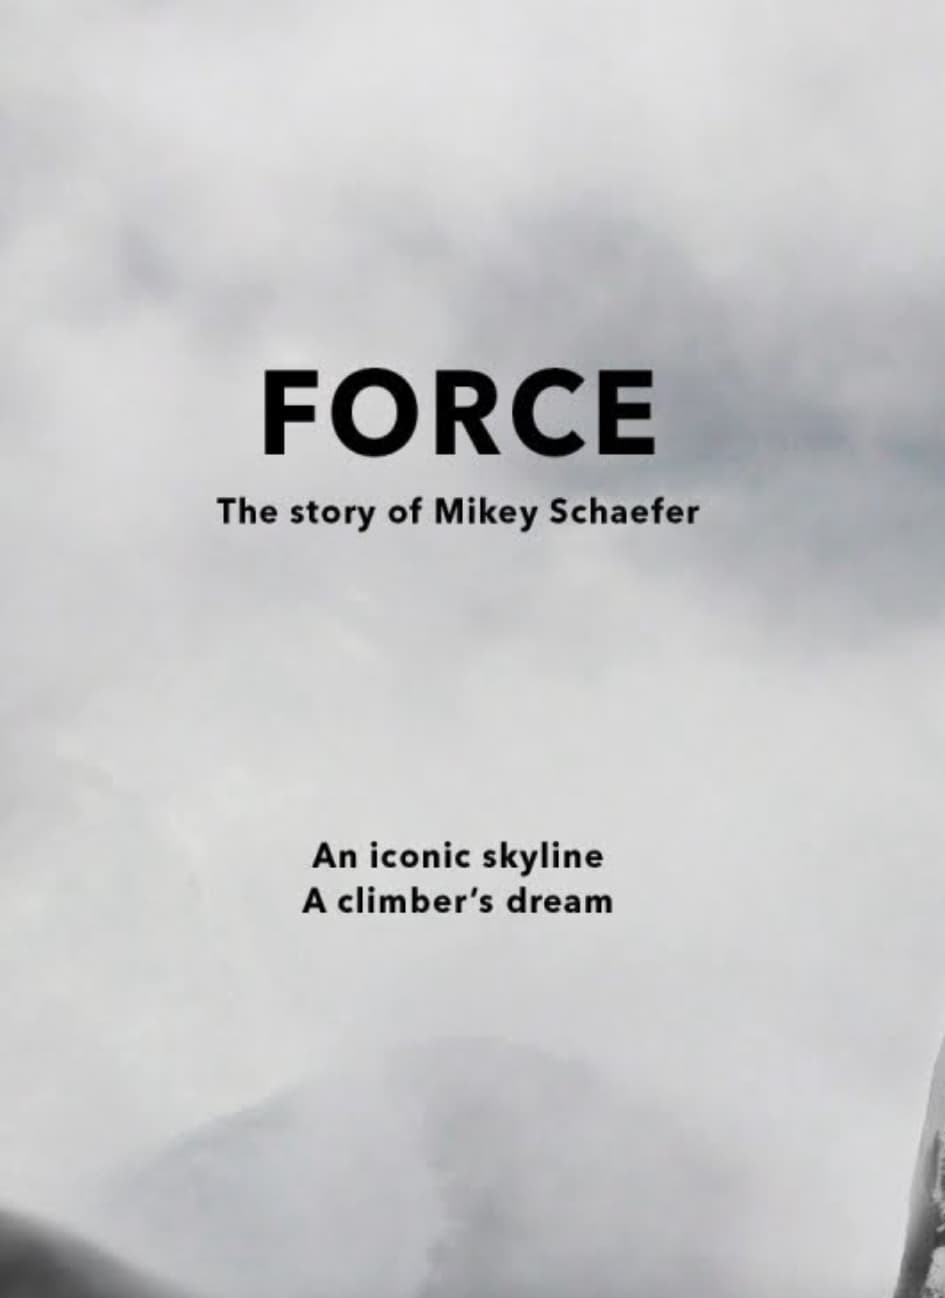 FORCE - The Story of Mikey Schaefer